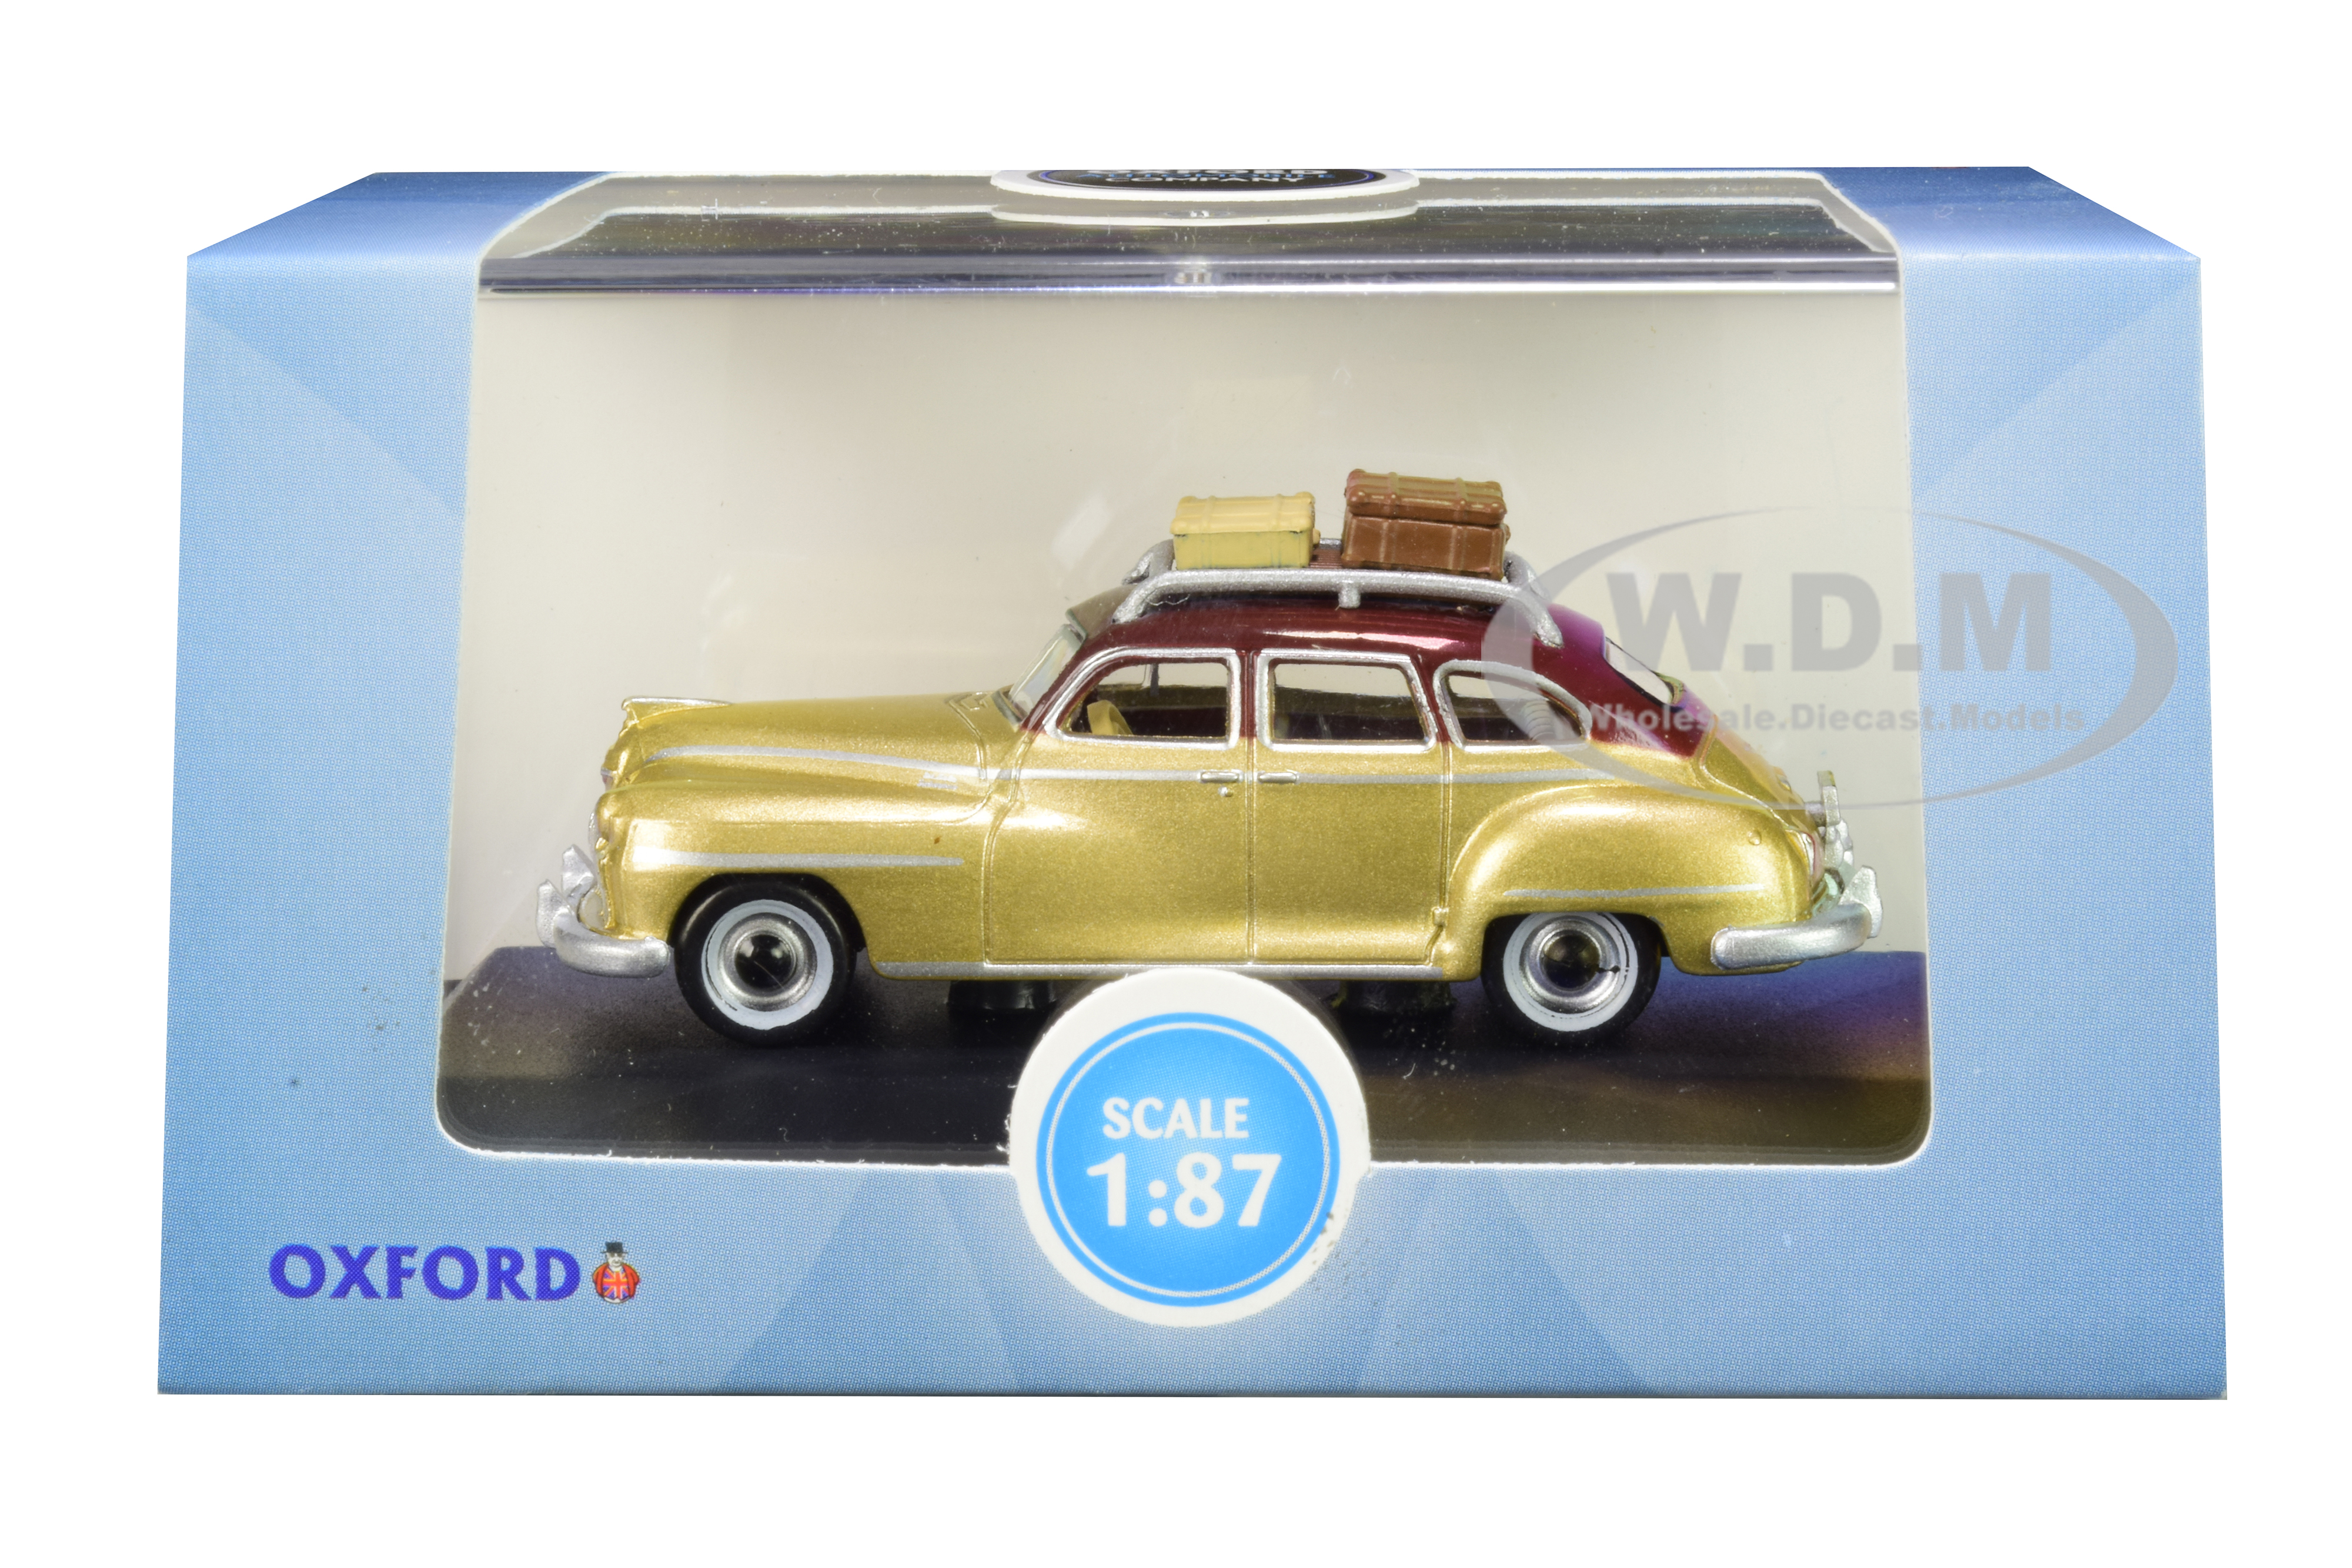 1946 DeSoto Suburban with Roof Rack and Luggage Trumpet Gold with Rhythm Brown Top 1/87 (HO) Scale Diecast Model Car by Oxford Diecast